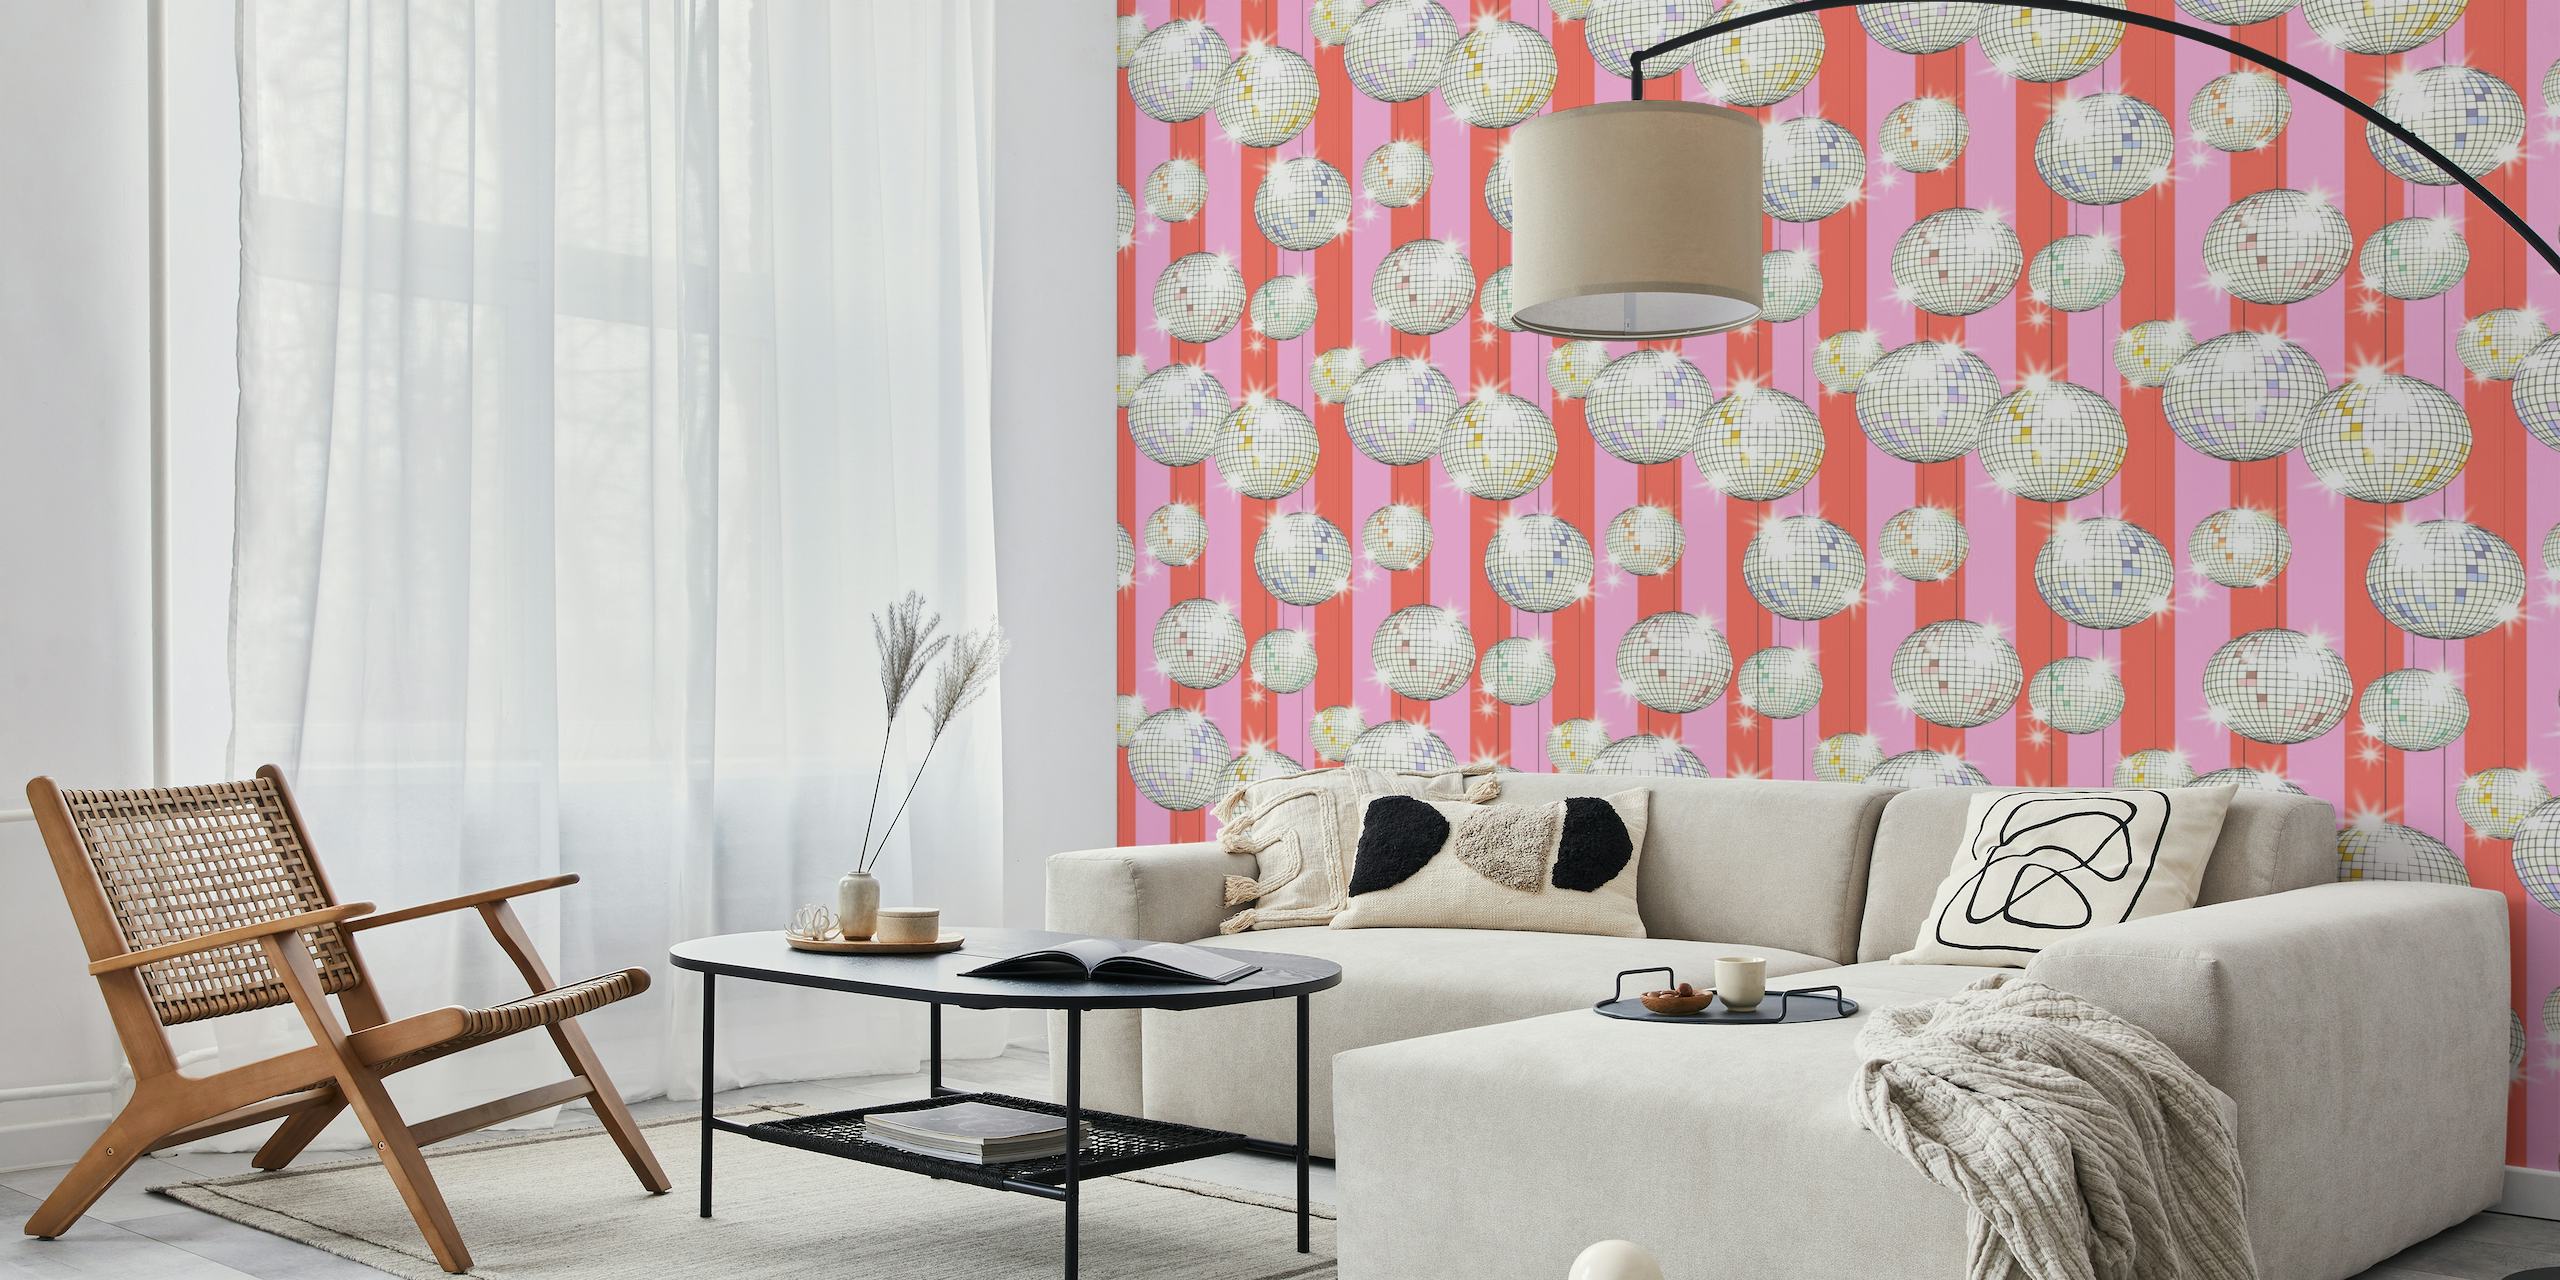 Pink-striped wall mural with sparkling disco balls